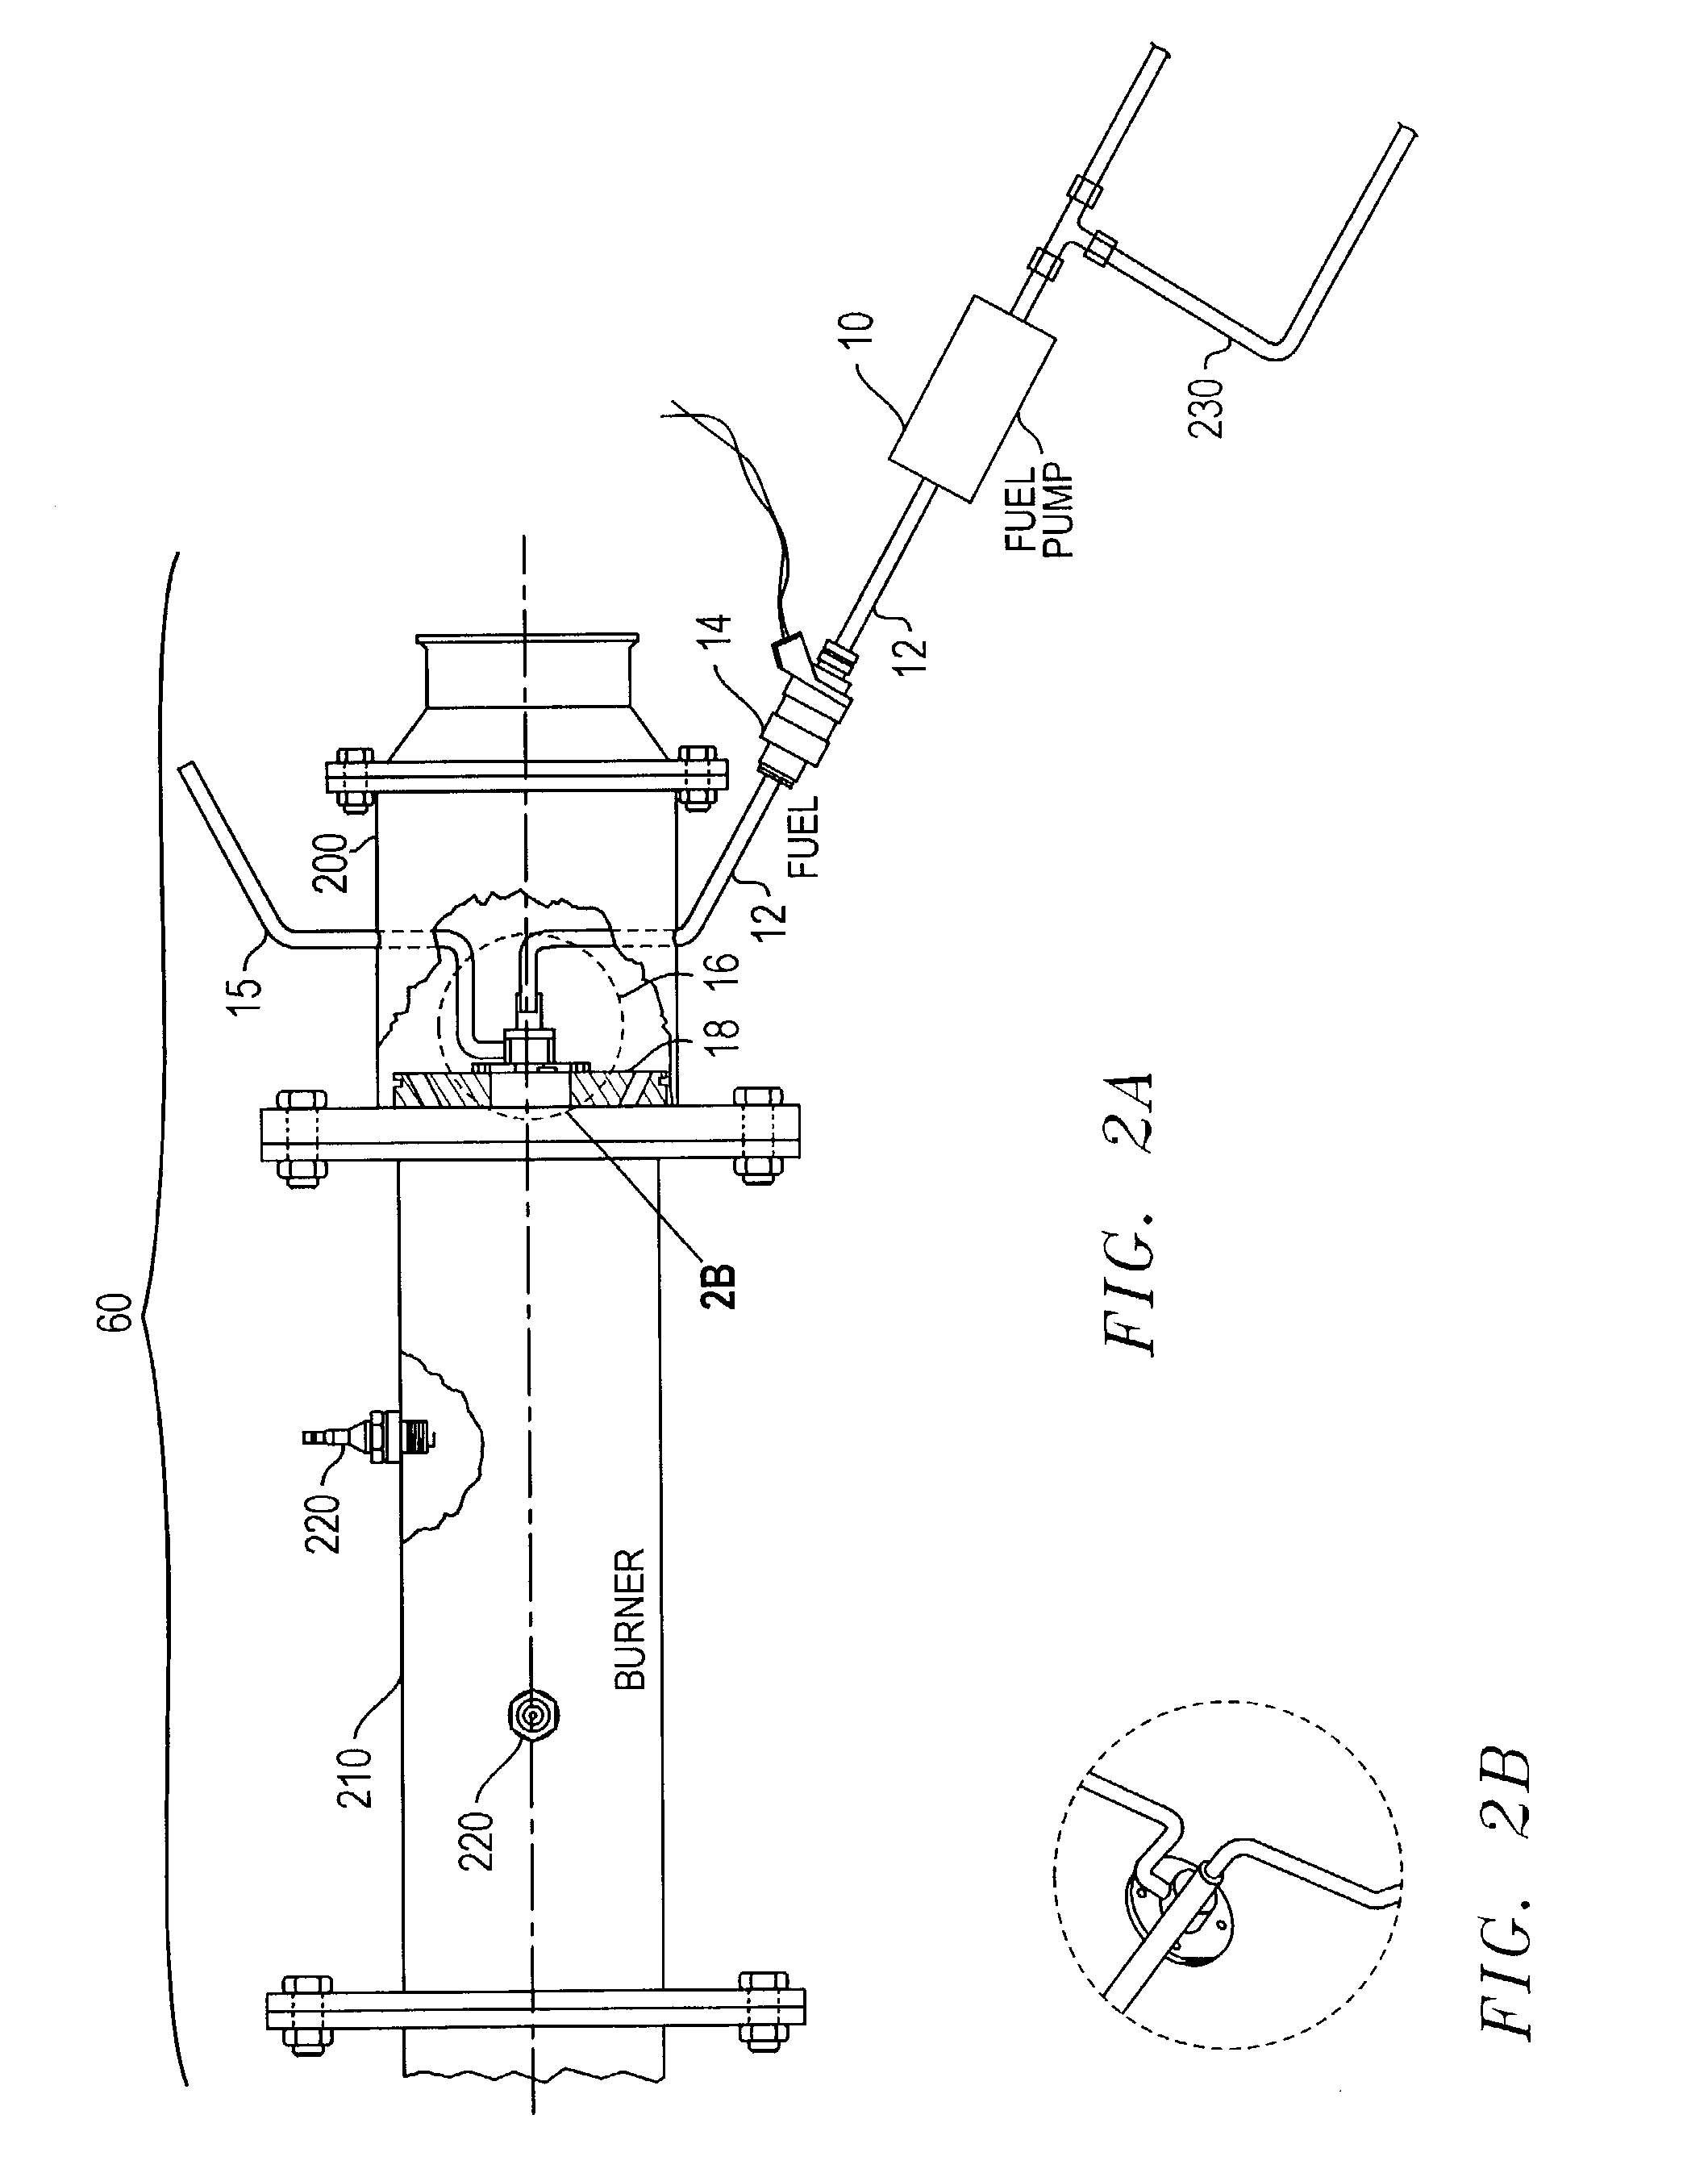 Method and apparatus for testing catalytic converter durability